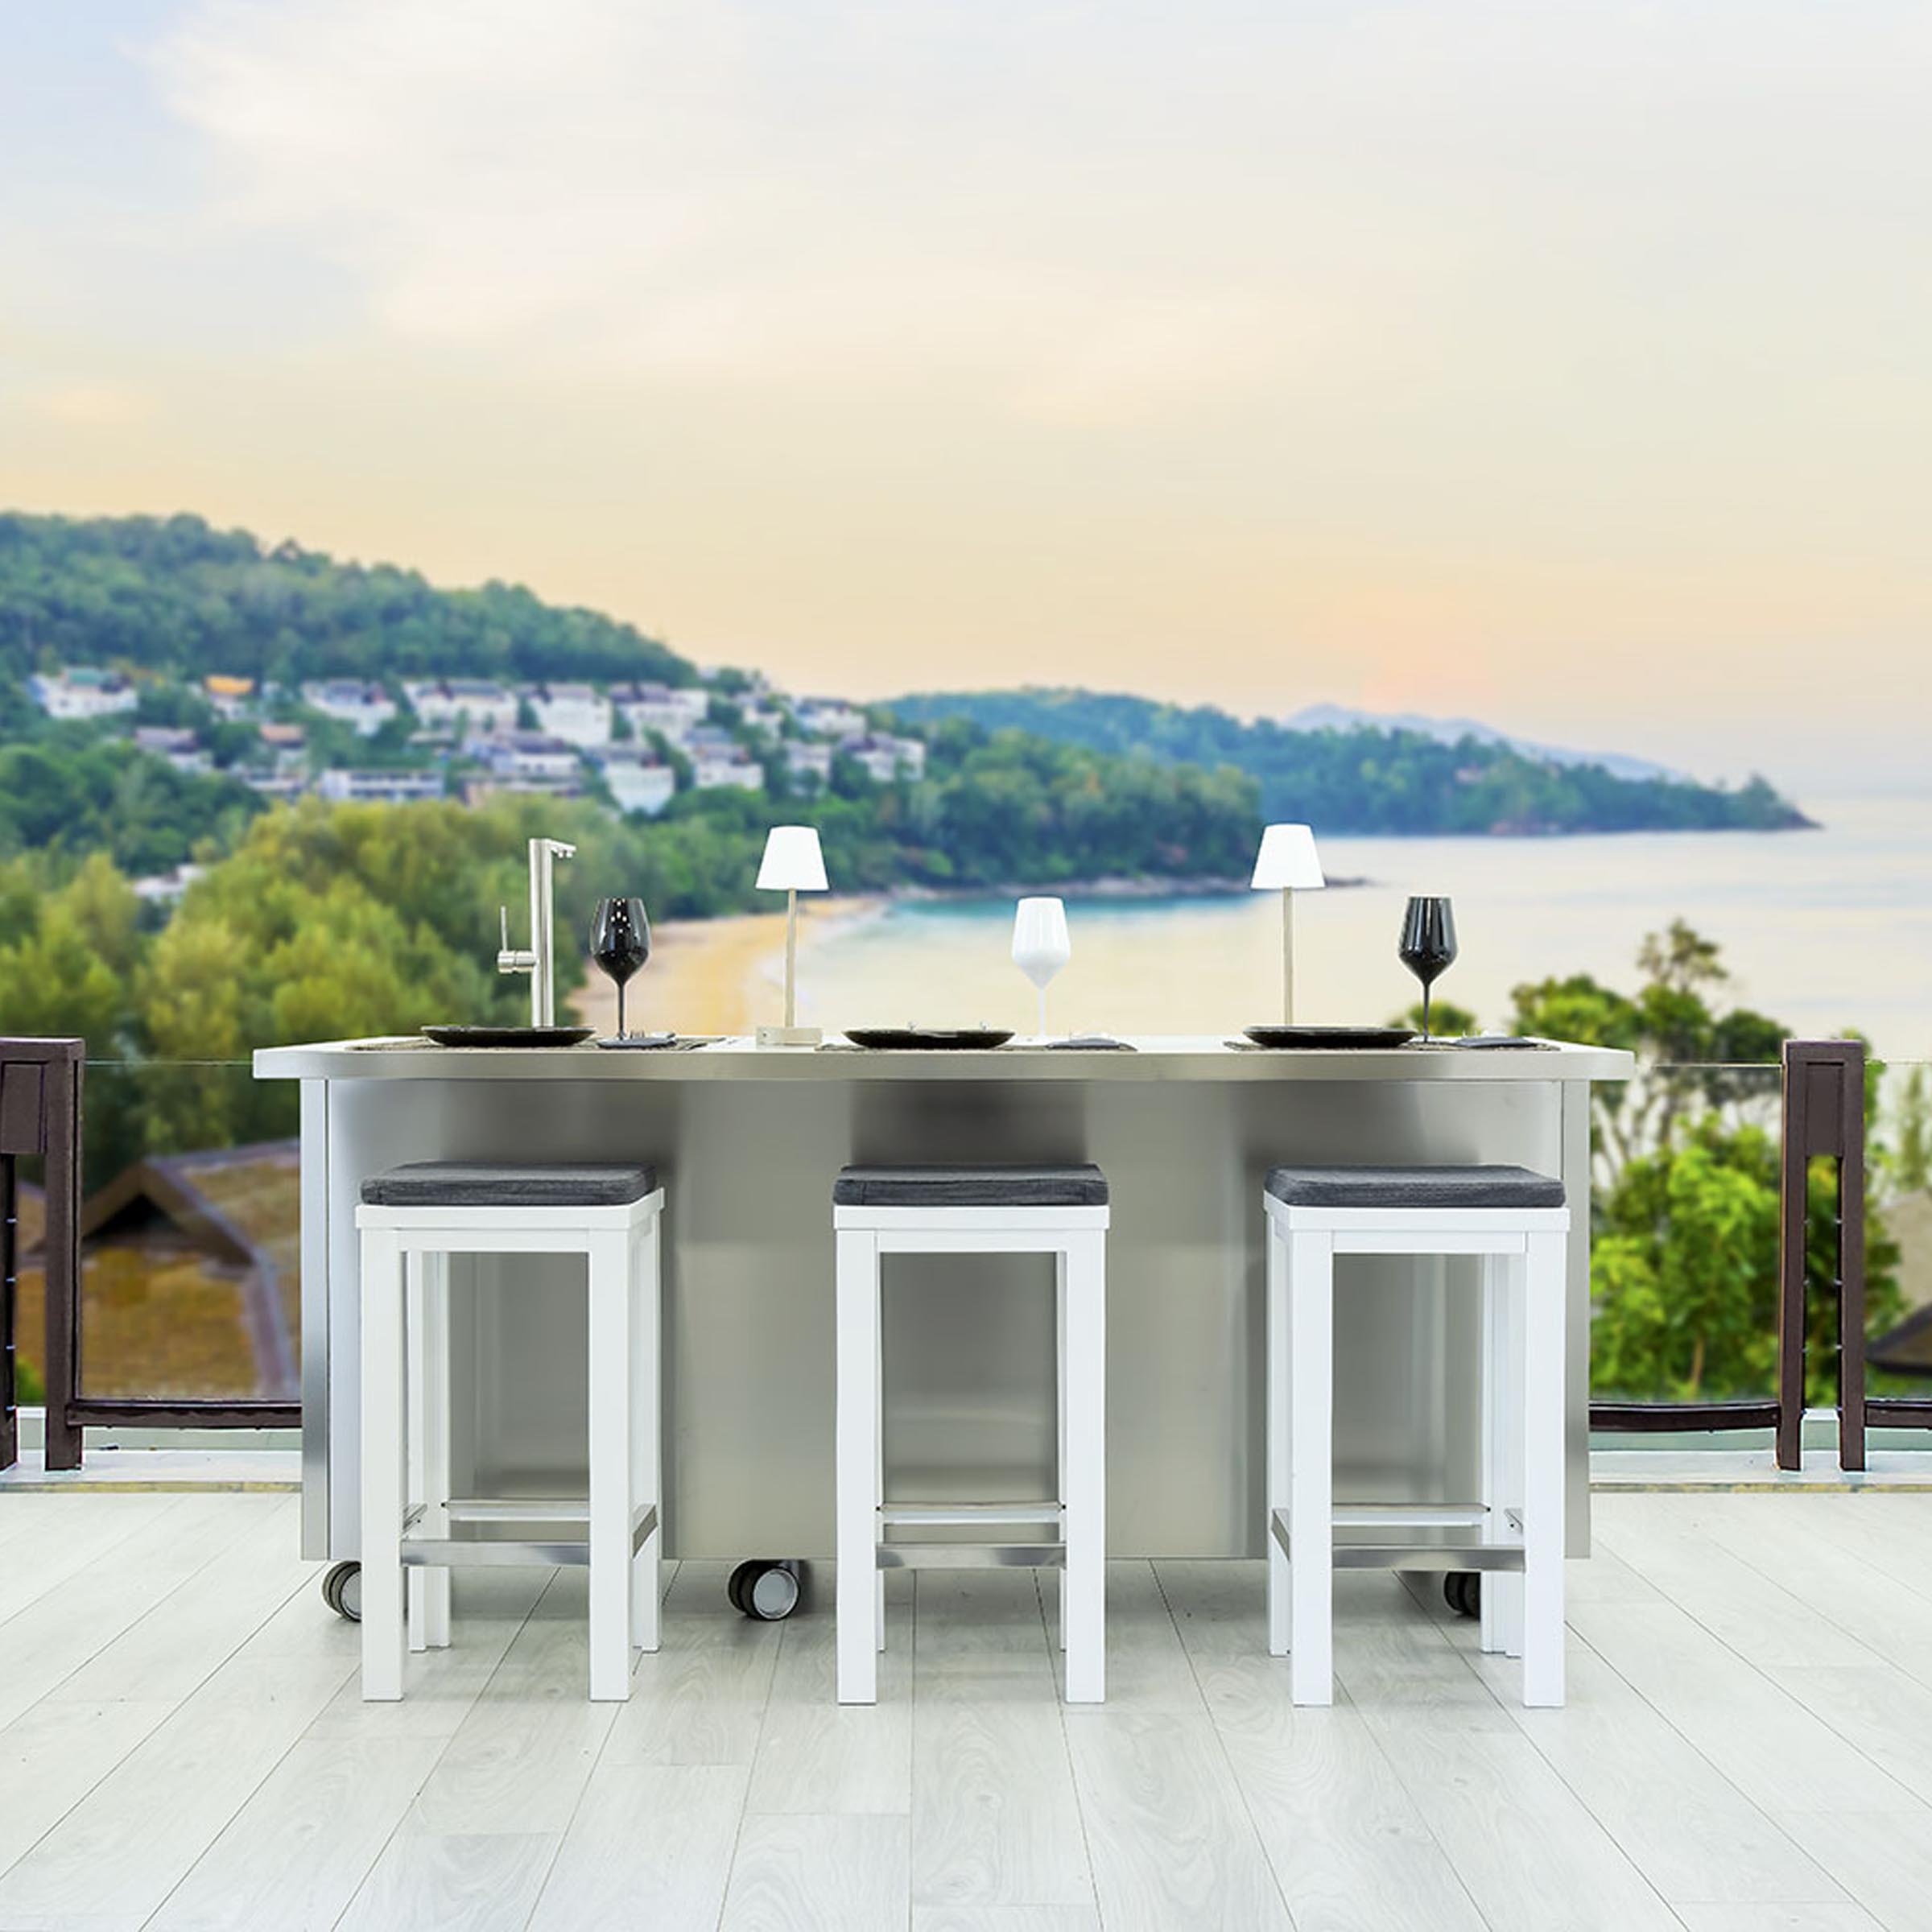 Outdoor Kitchens - Design Italy